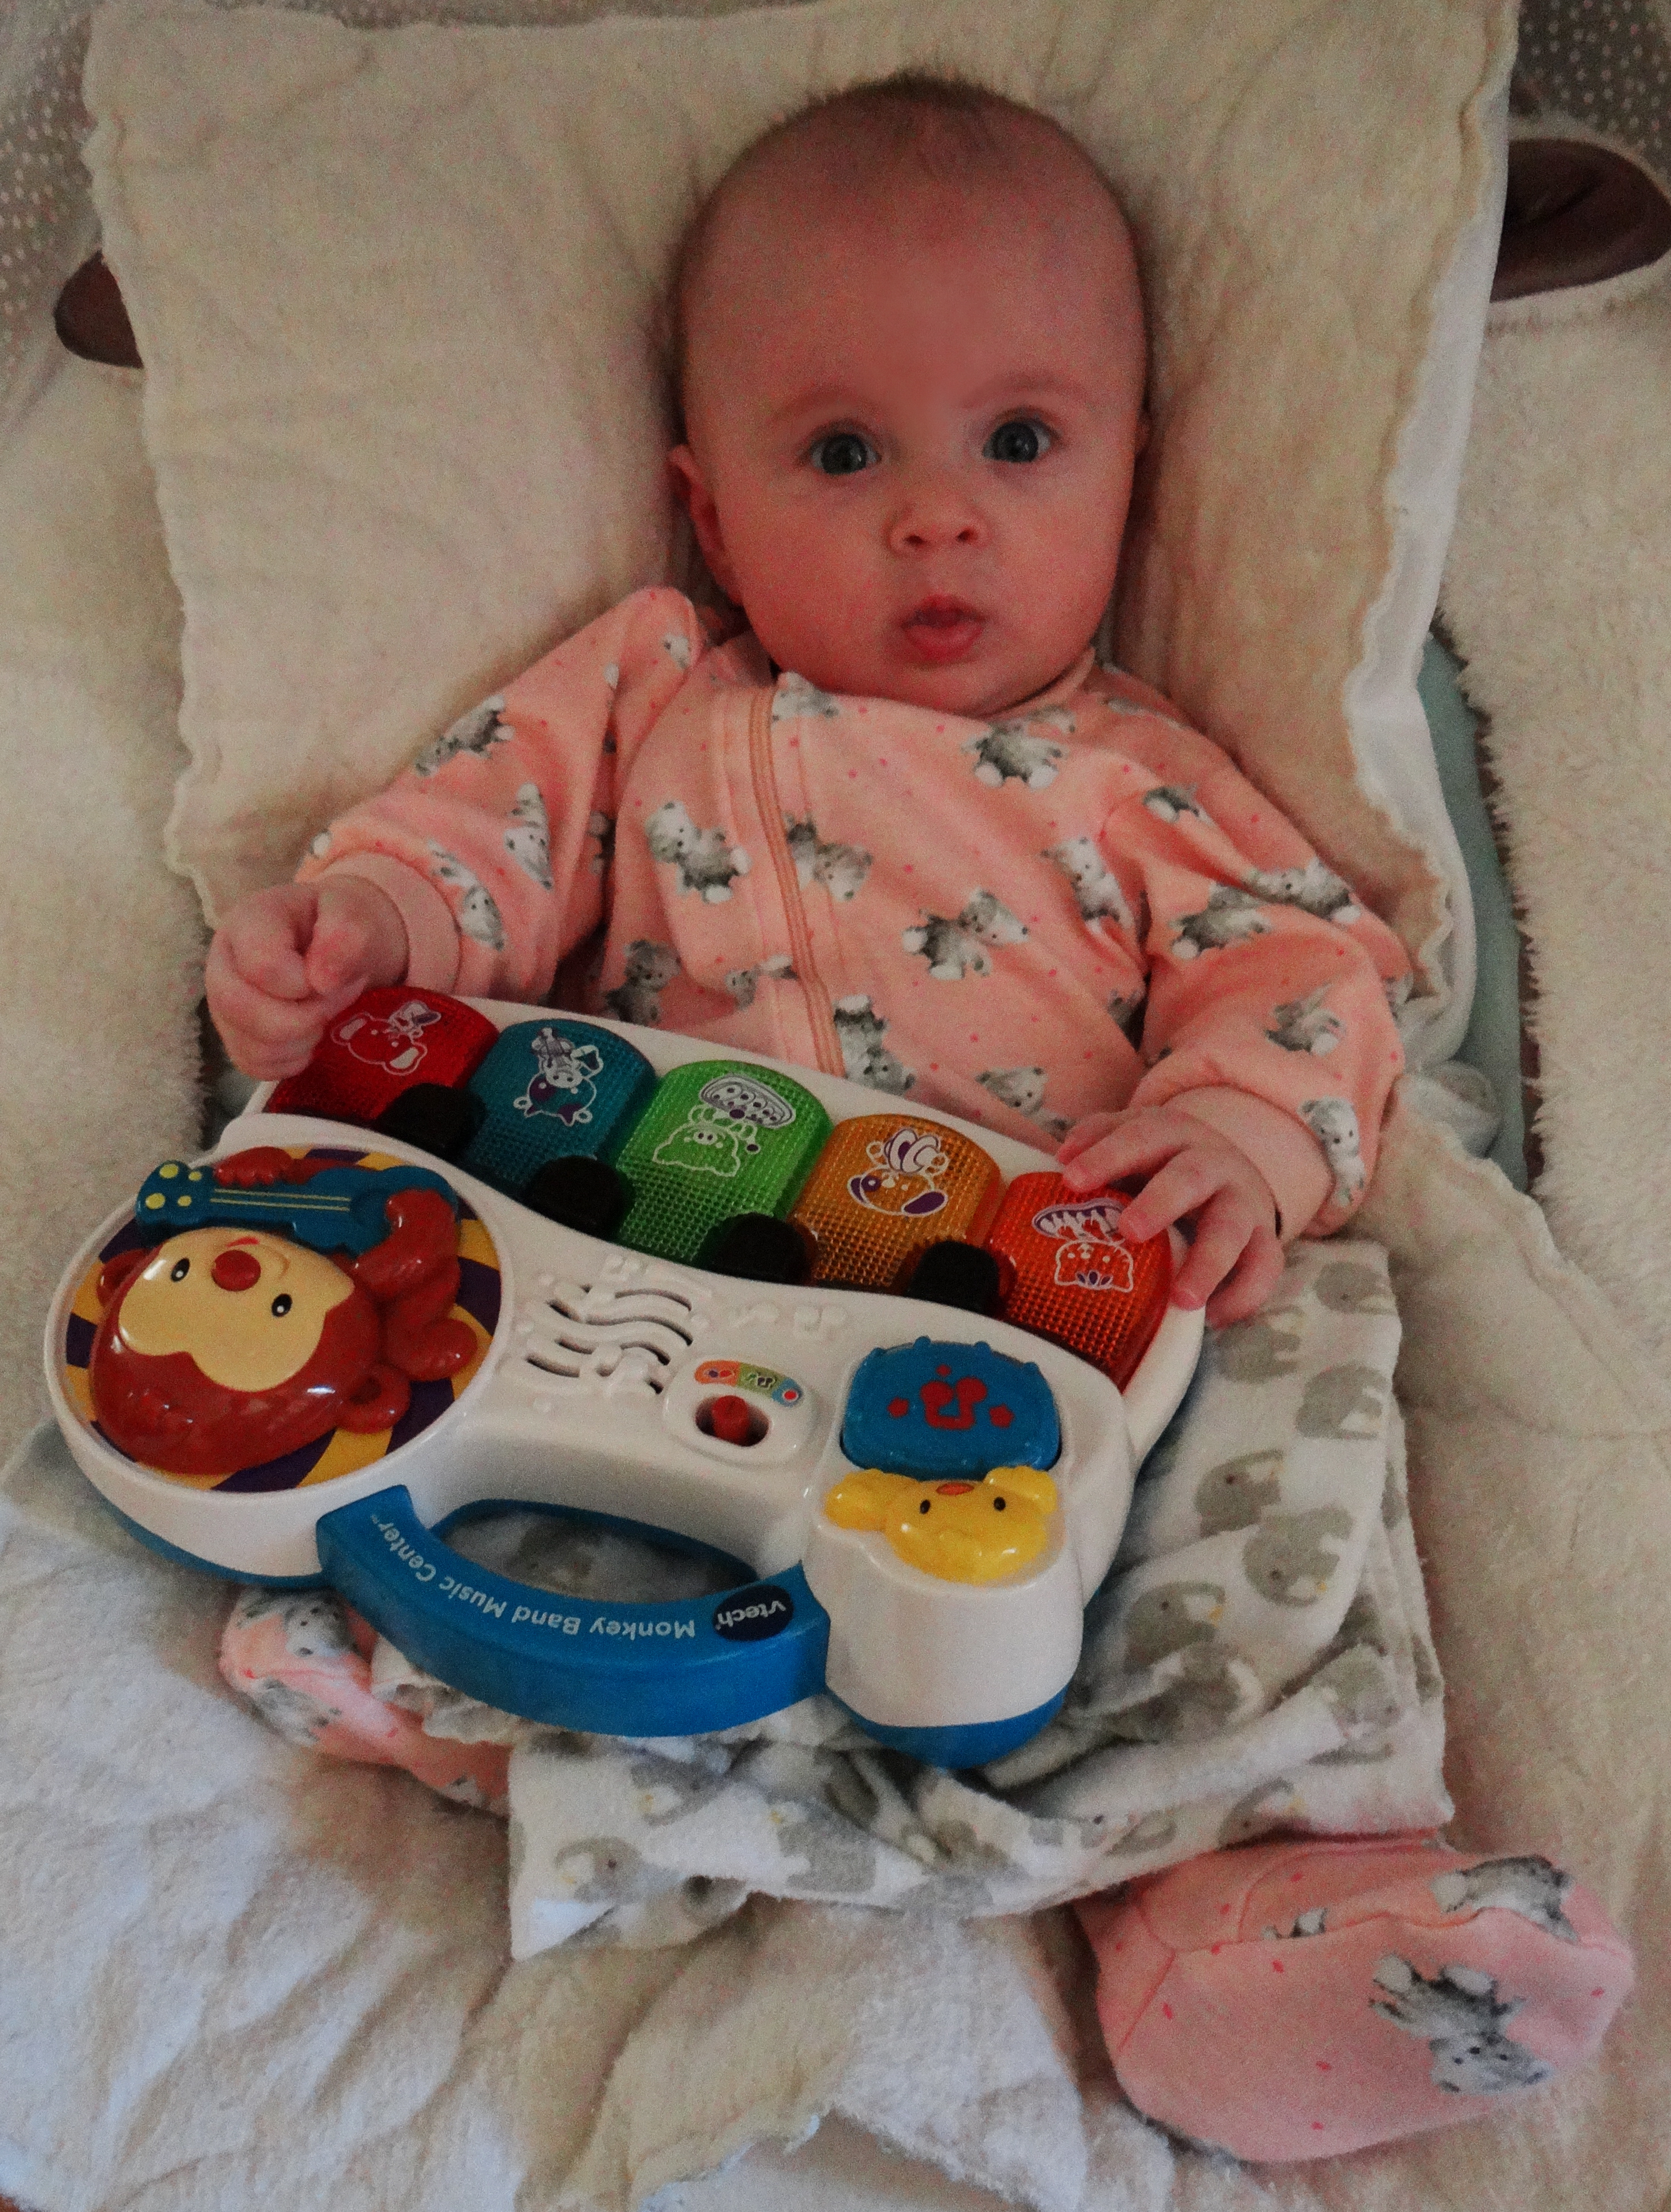 Baby with the Vtech Monkey Band Music Center